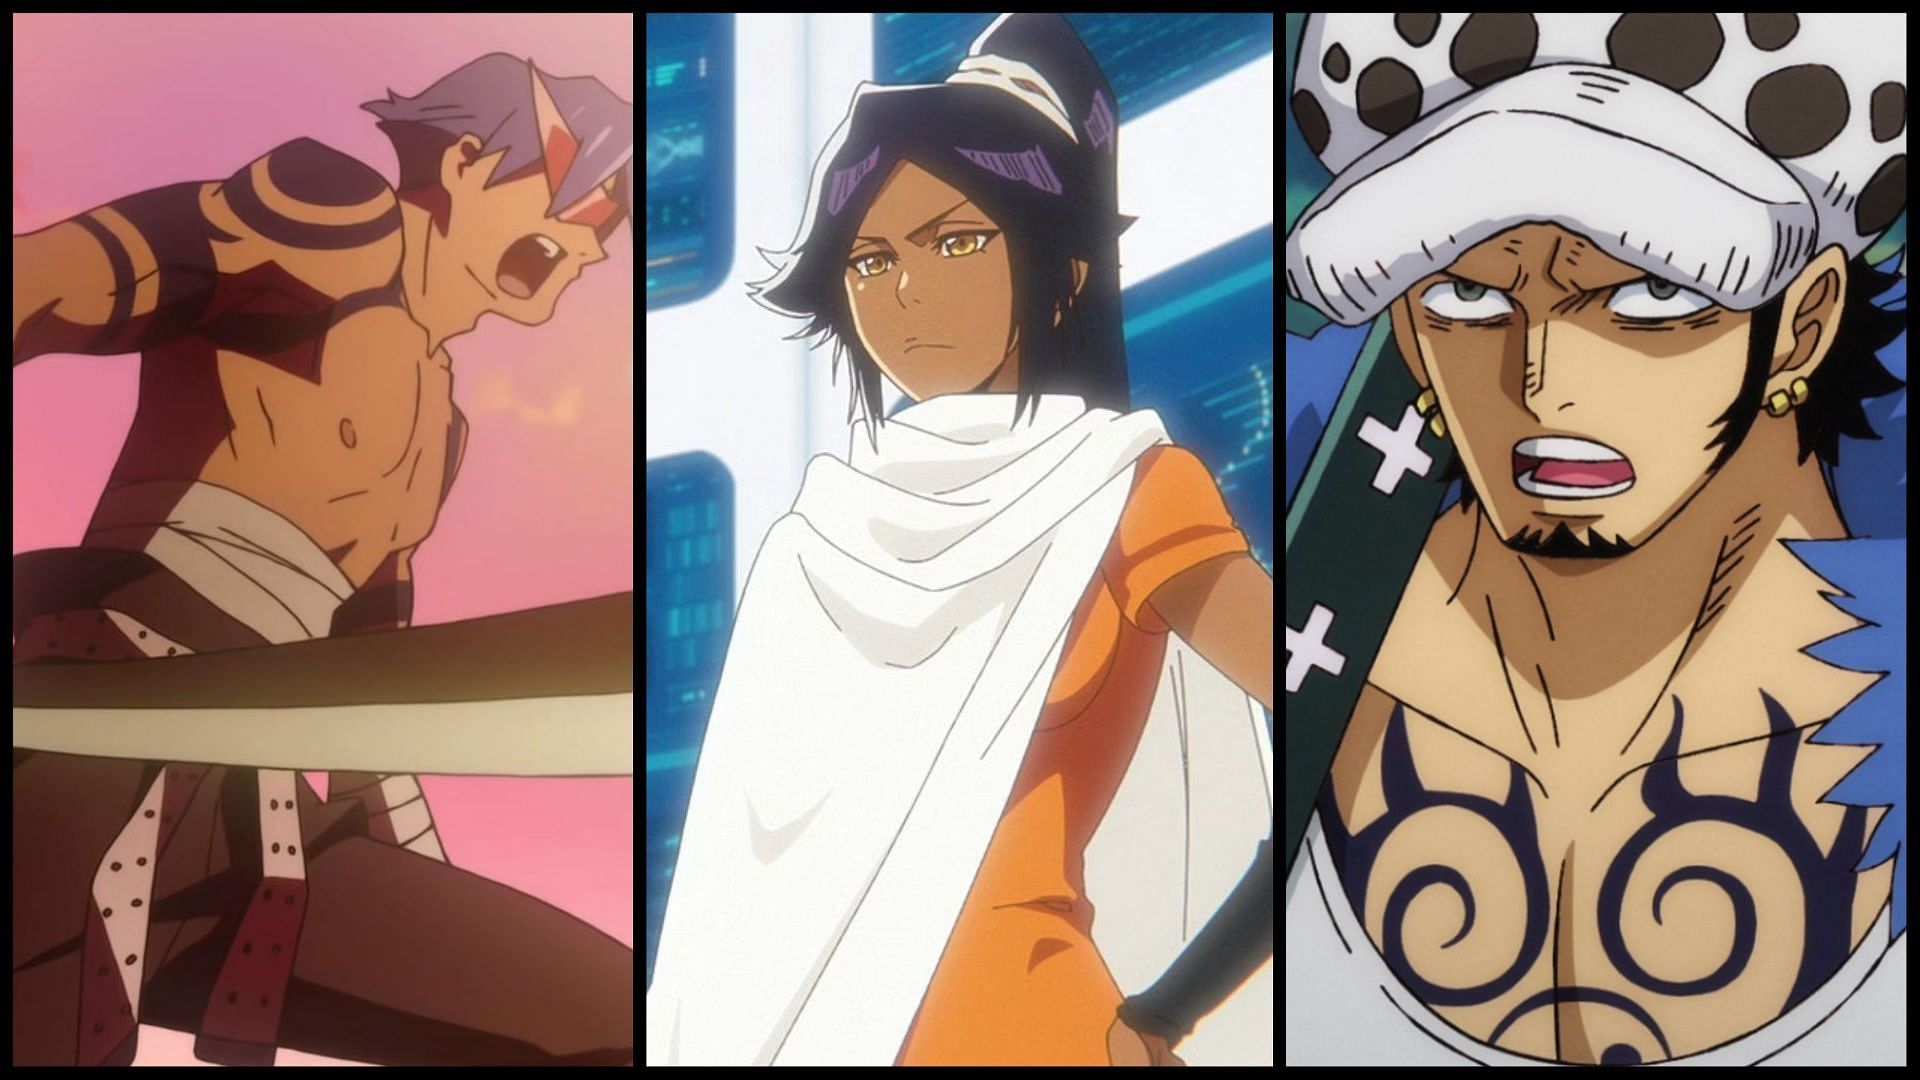 10 anime characters with tattoos, ranked by popularity (Images via Pierrot, Gainax,Toei Animation)